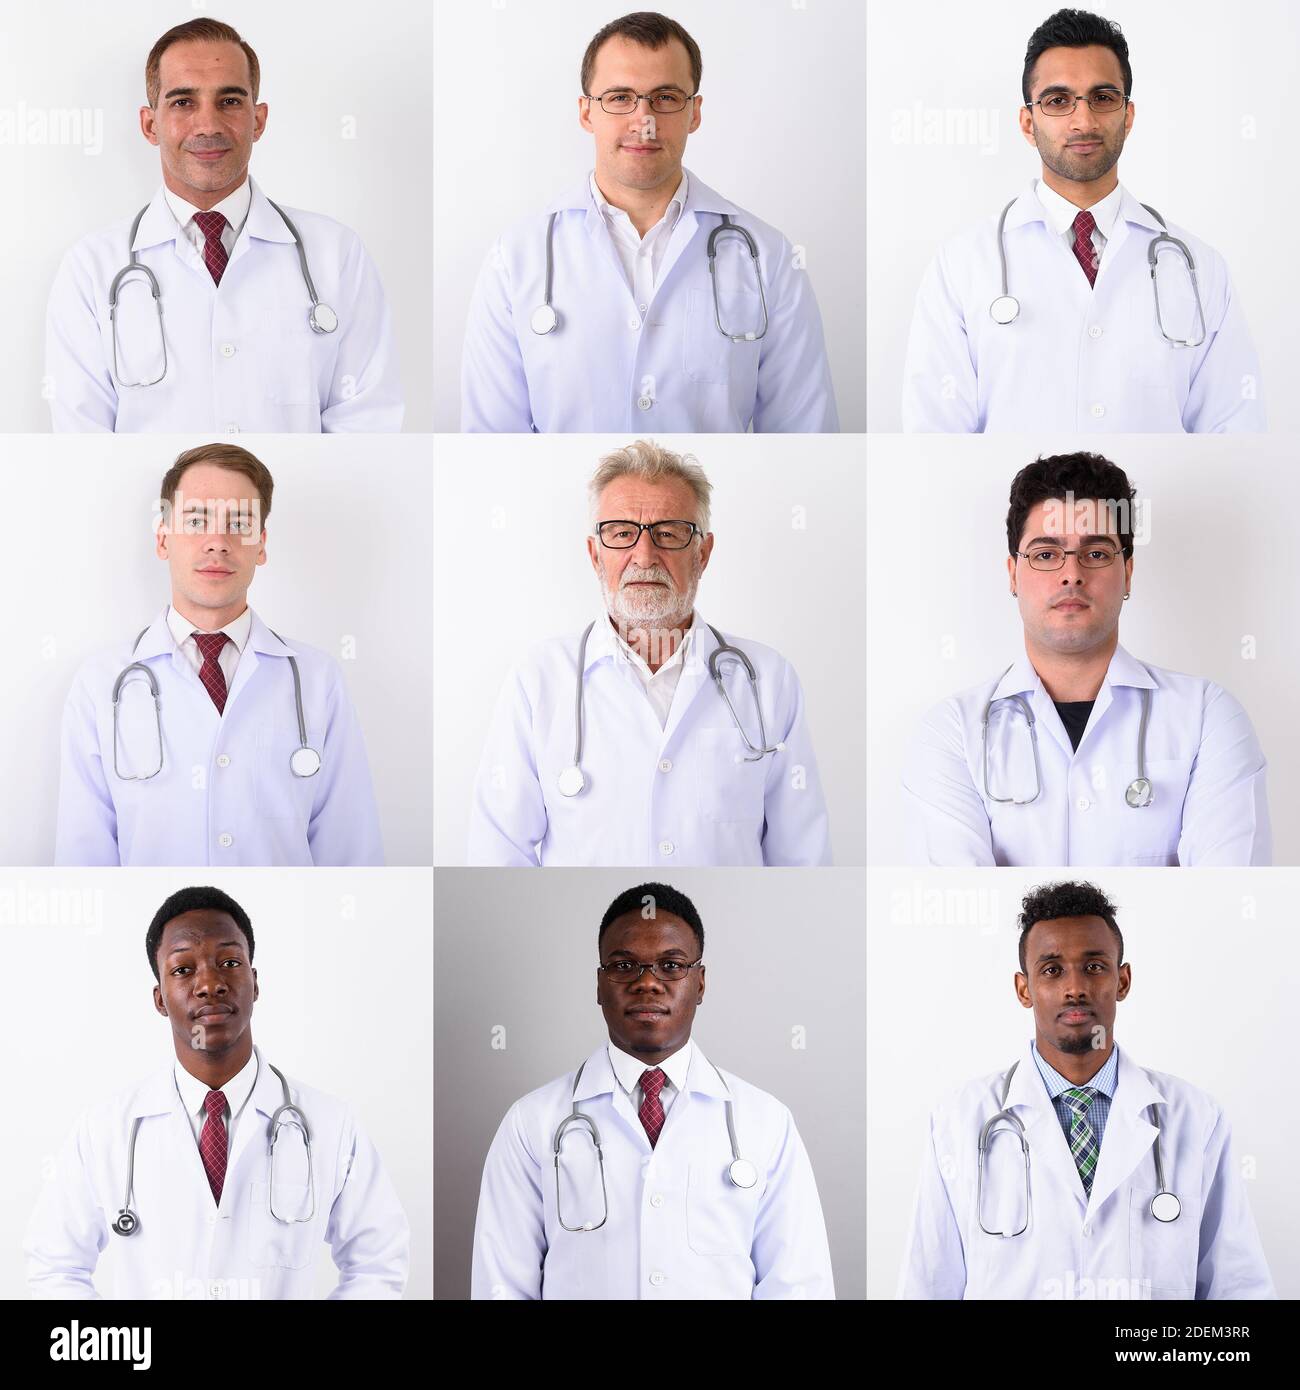 Doctor healthcare collage of men portraits against white background Stock Photo